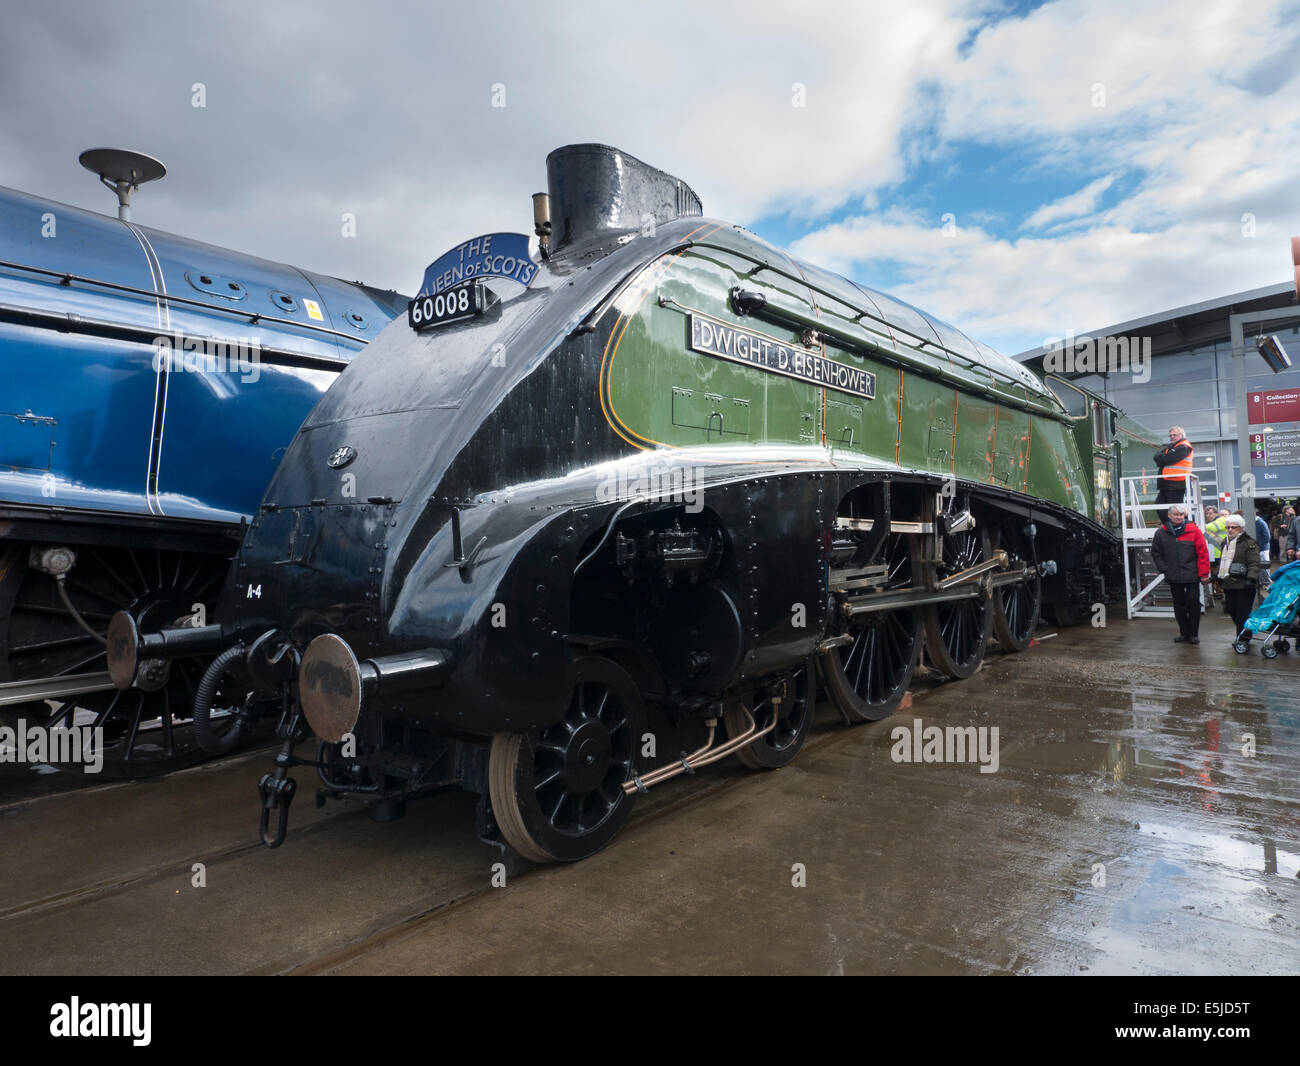 Class A4 sister engines gather for Great Goodbye at Shildon, County Durham, LNER Class A4 4496 Dwight D Eisenhower Stock Photo